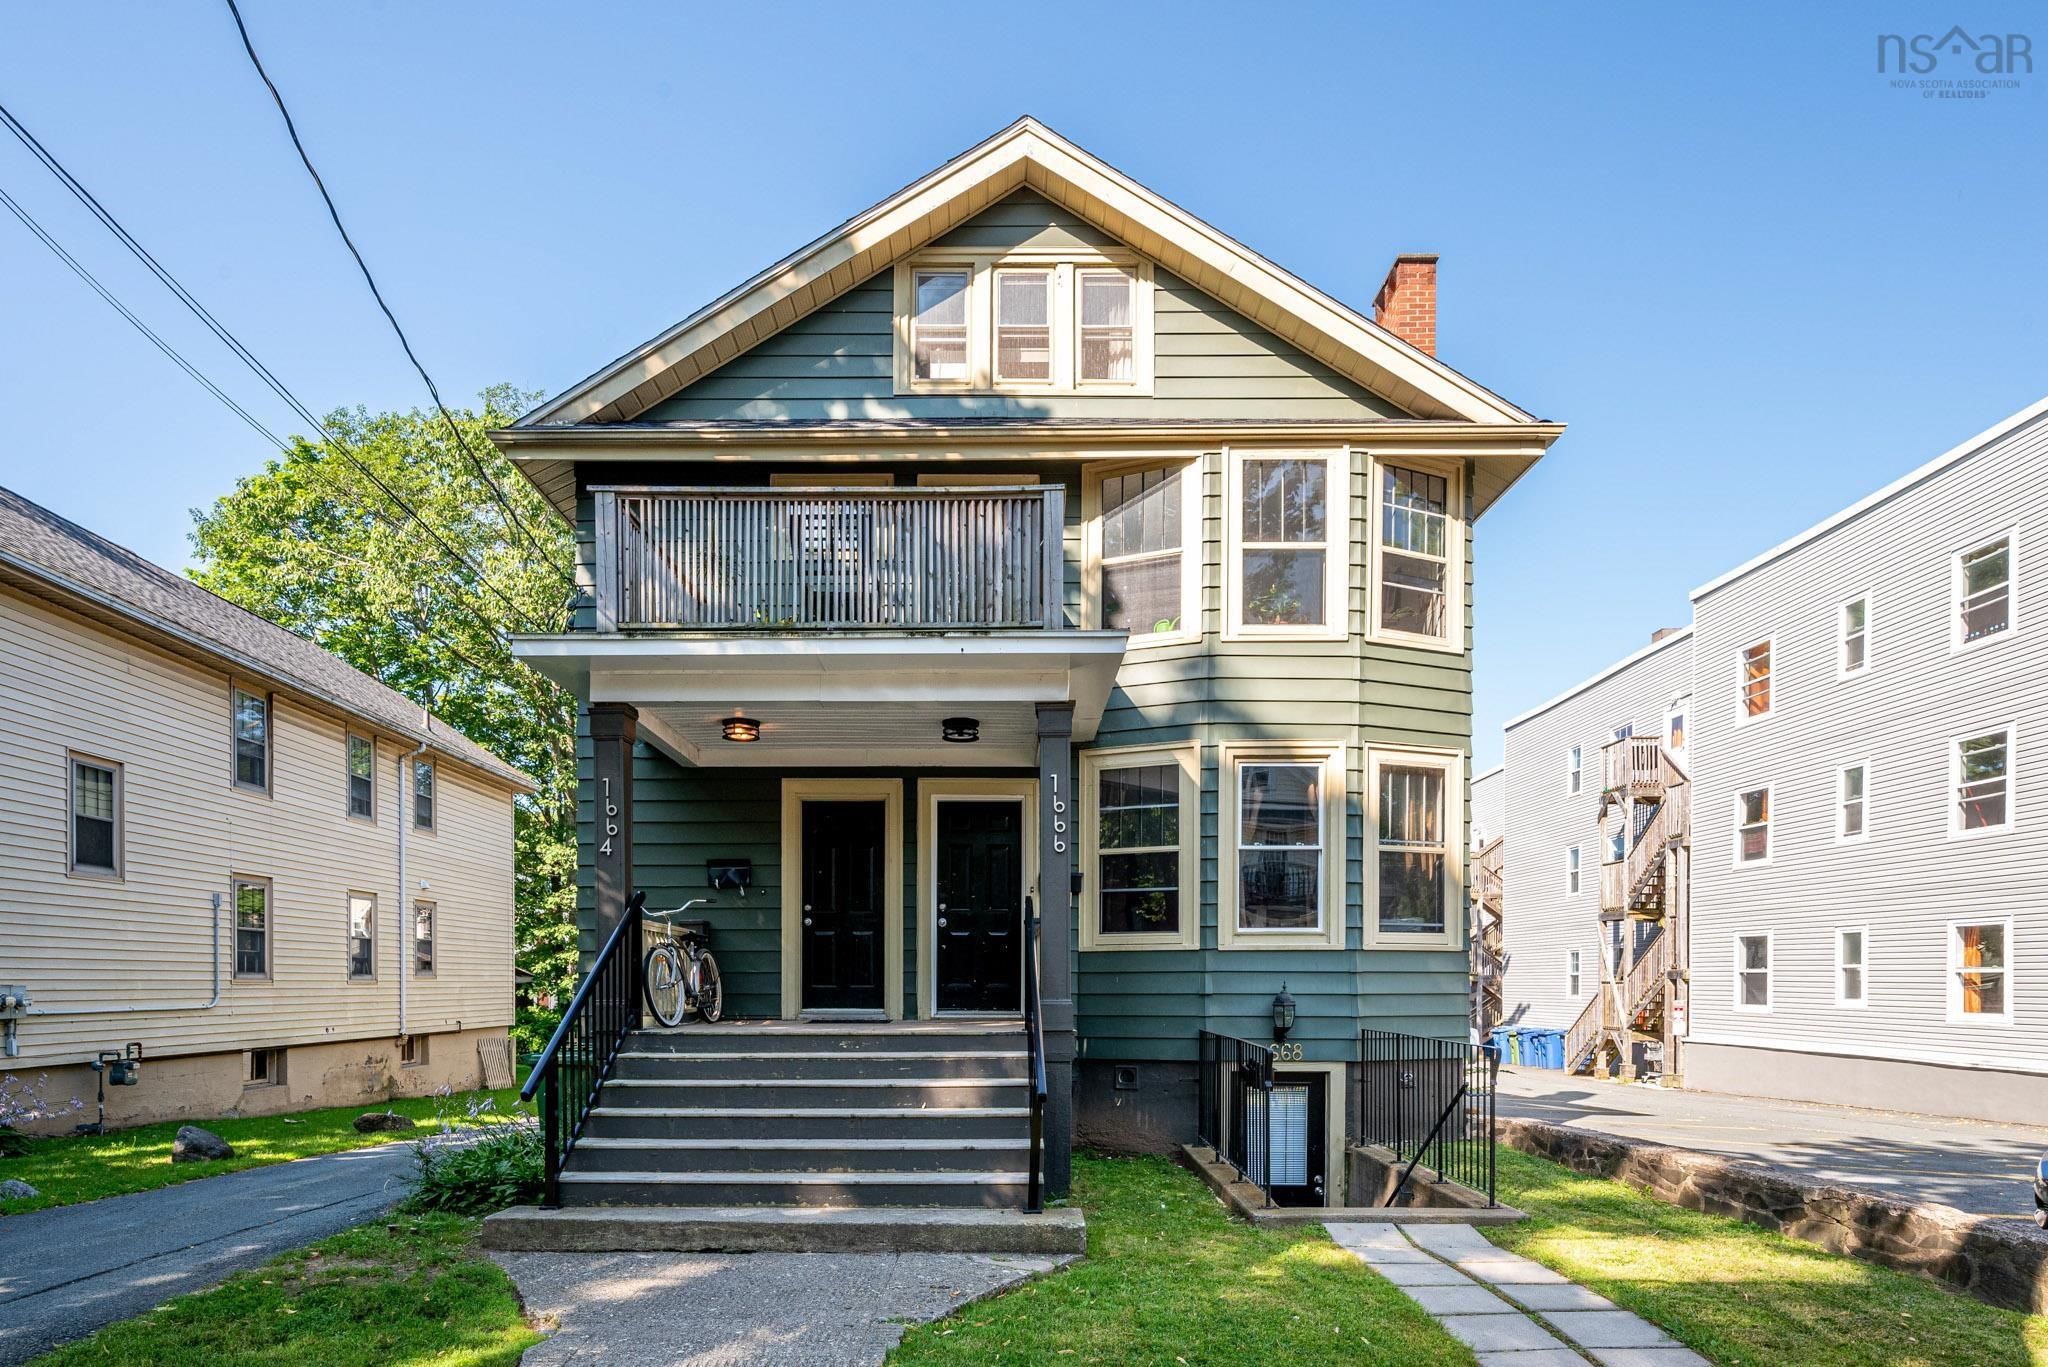 Main Photo: 1664-1666-1668 LARCH Street in Halifax: 2-Halifax South Multi-Family for sale (Halifax-Dartmouth)  : MLS®# 202319201